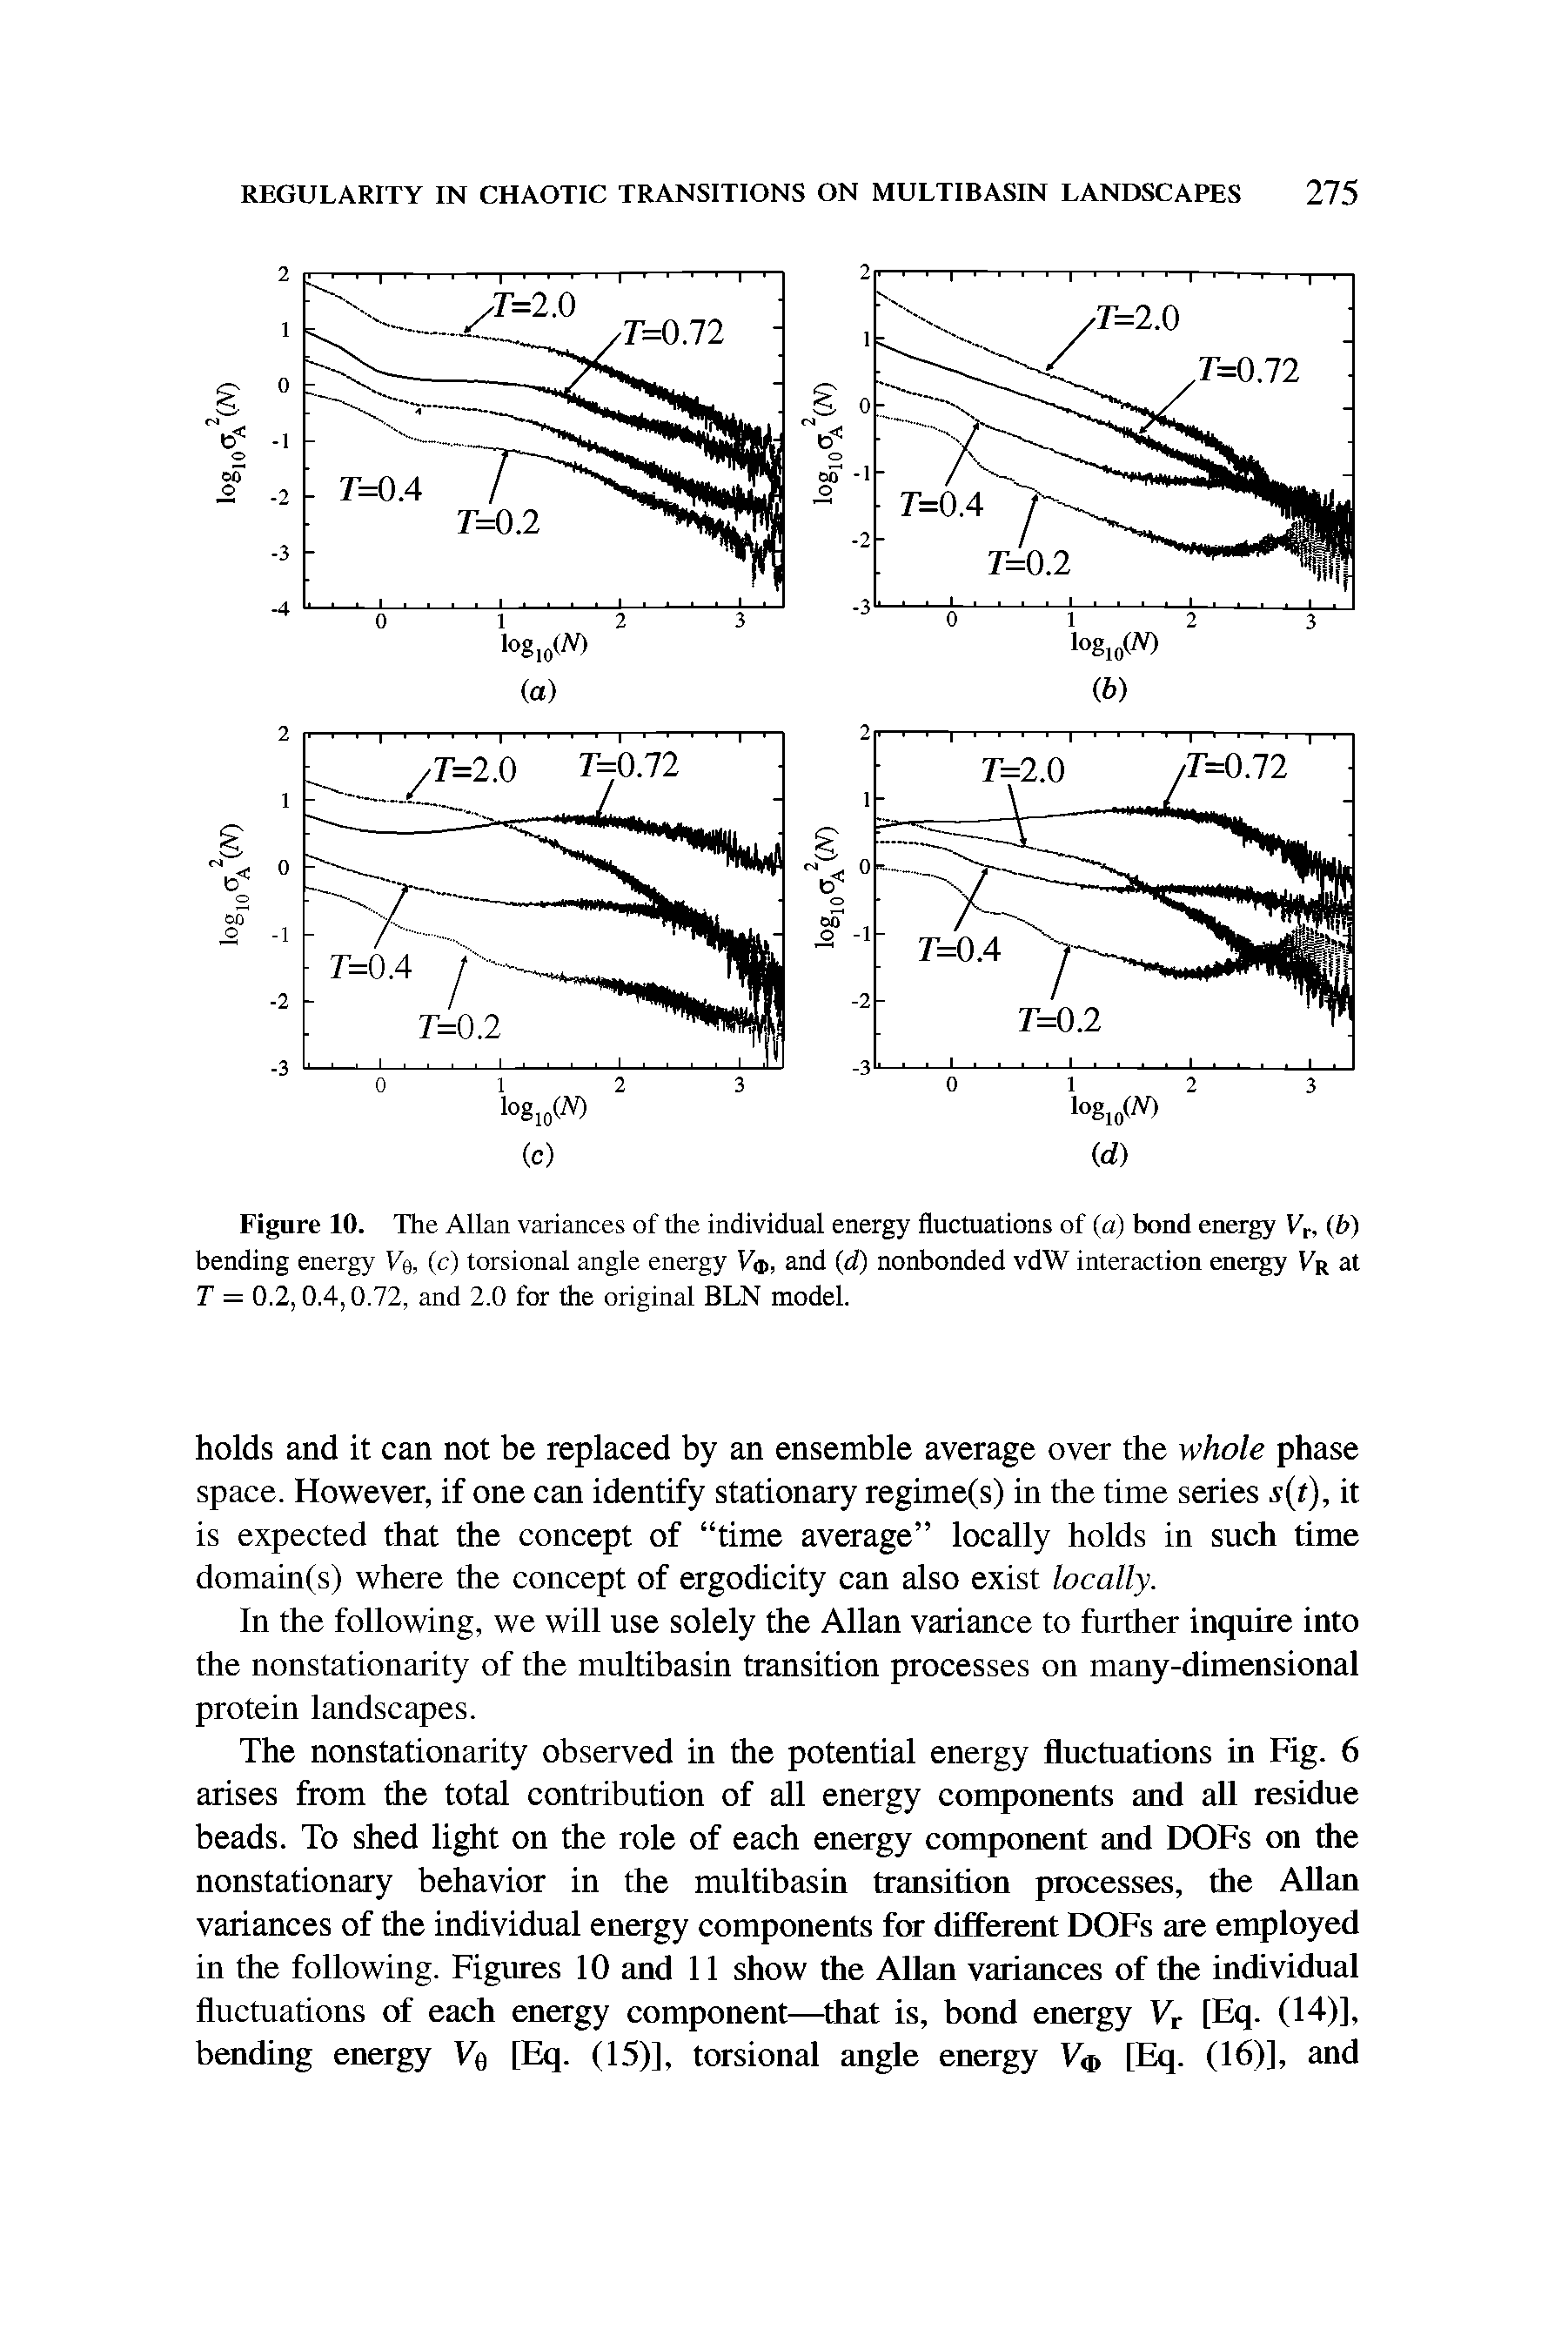 Figure 10. The Allan variances of the individual energy fluctuations of (a) bond energy Vr, (b) bending energy V (c) torsional angle energy Vtn, and (d) nonbonded vdW interaction energy Vr at T = 0.2,0.4,0.72, and 2.0 for the original BLN model.